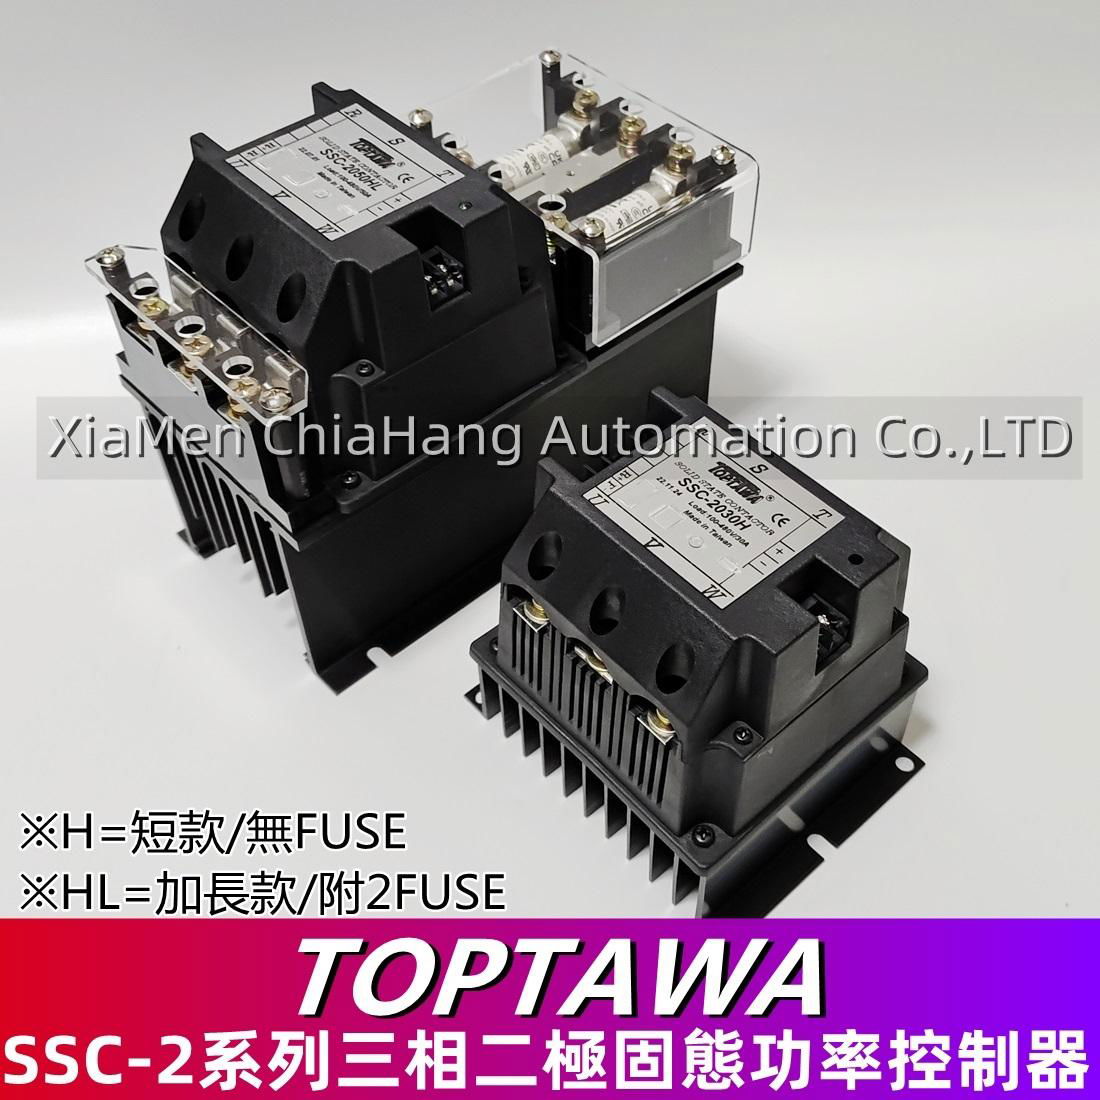 TOPTAWA SOLID STATE CONTACTOR  SSC-2030H SSC-2050H SSC-2070H SSC-2100H SSC-2120H SSC-2160H SSC-2200H